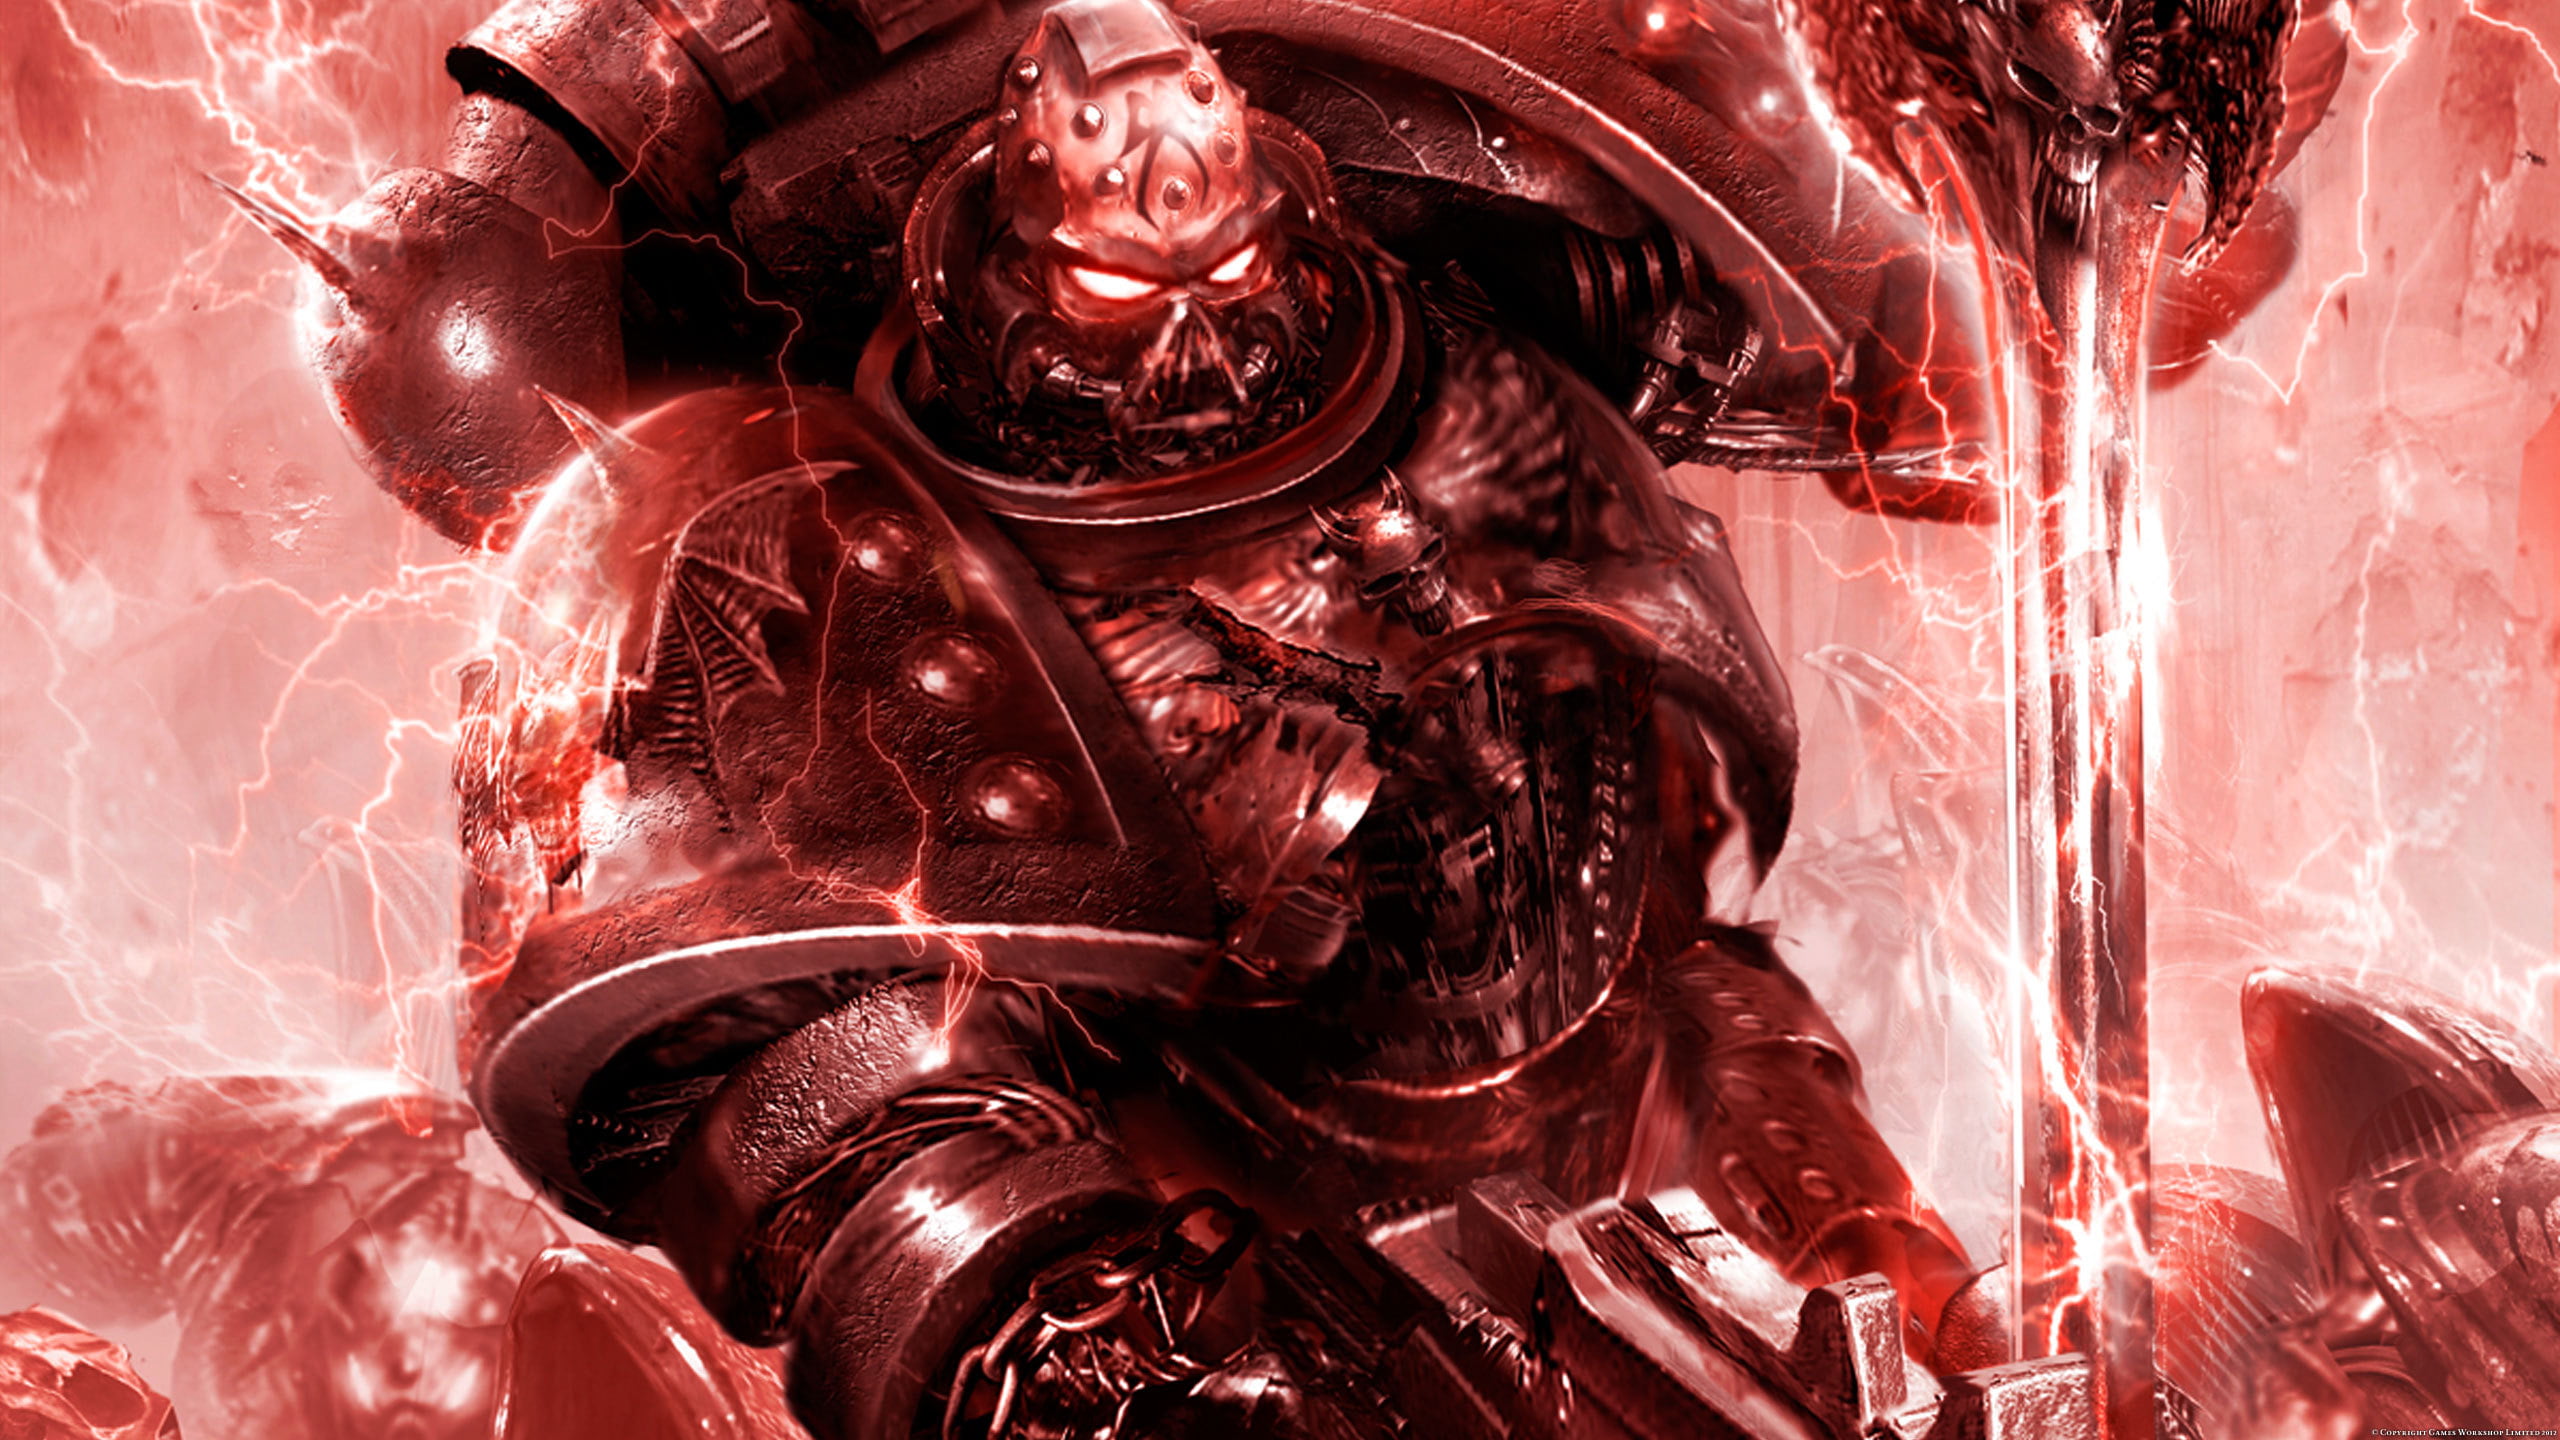 Night Lords wallpaper, chaos, warhammer 40000, heretics, cultists